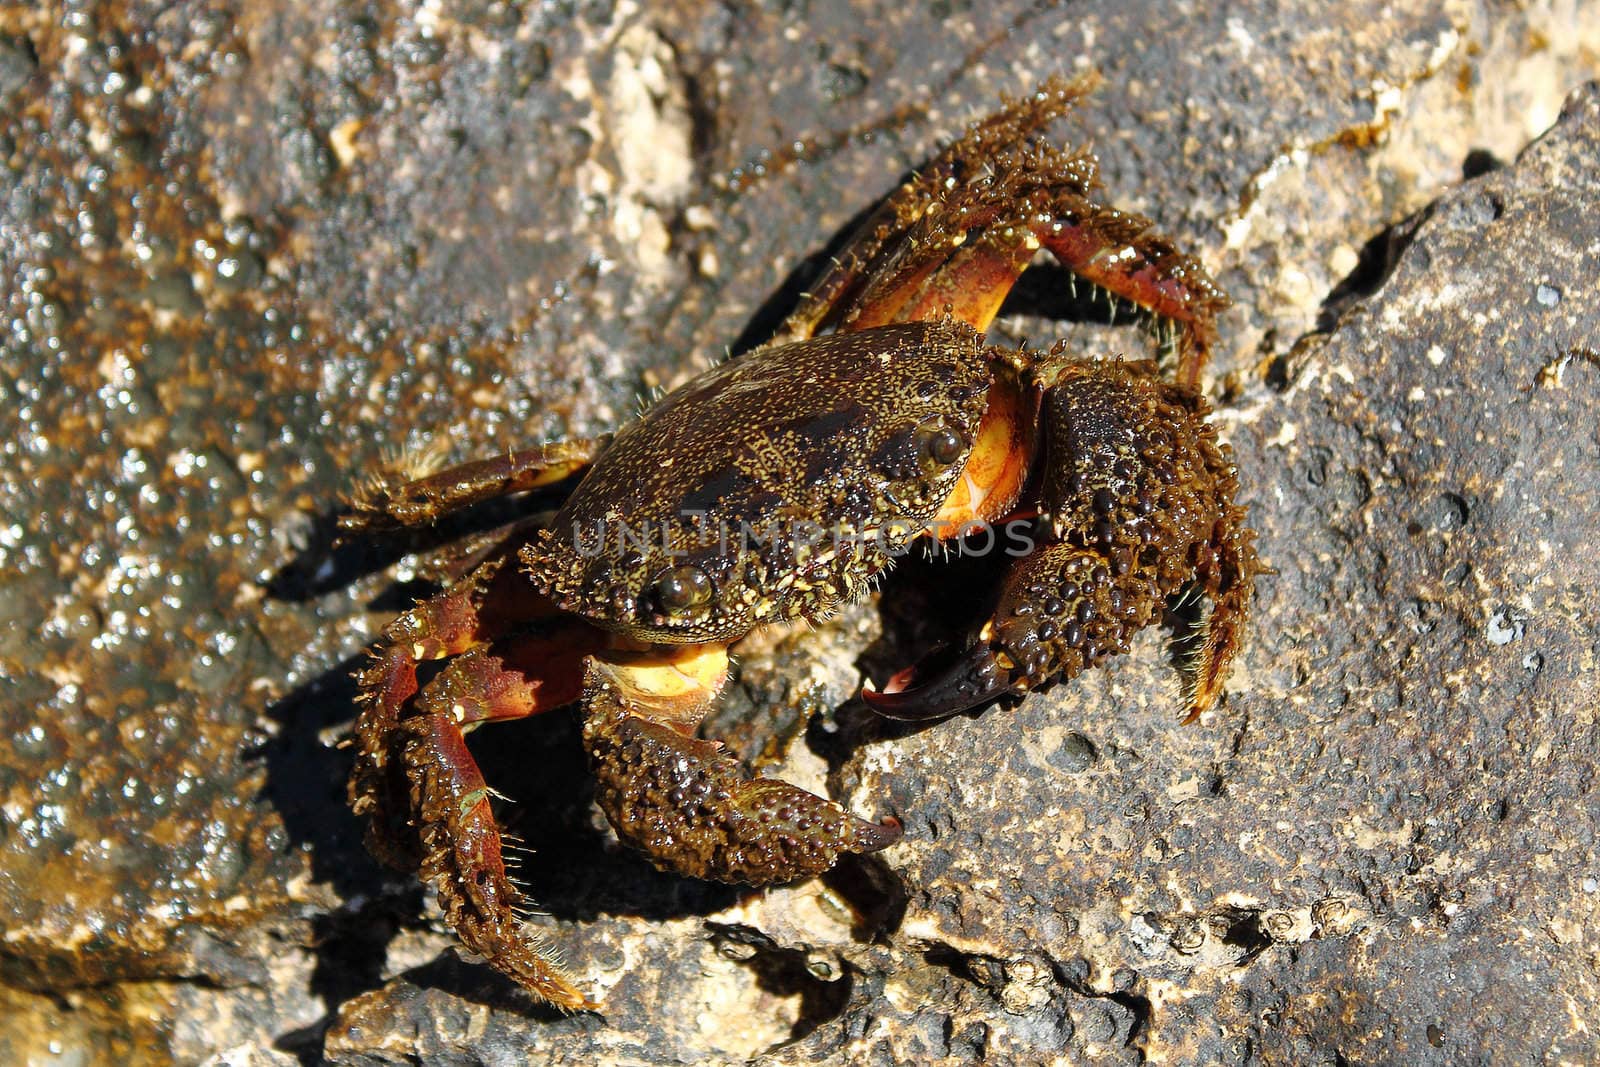 middle size crab on rock by artush